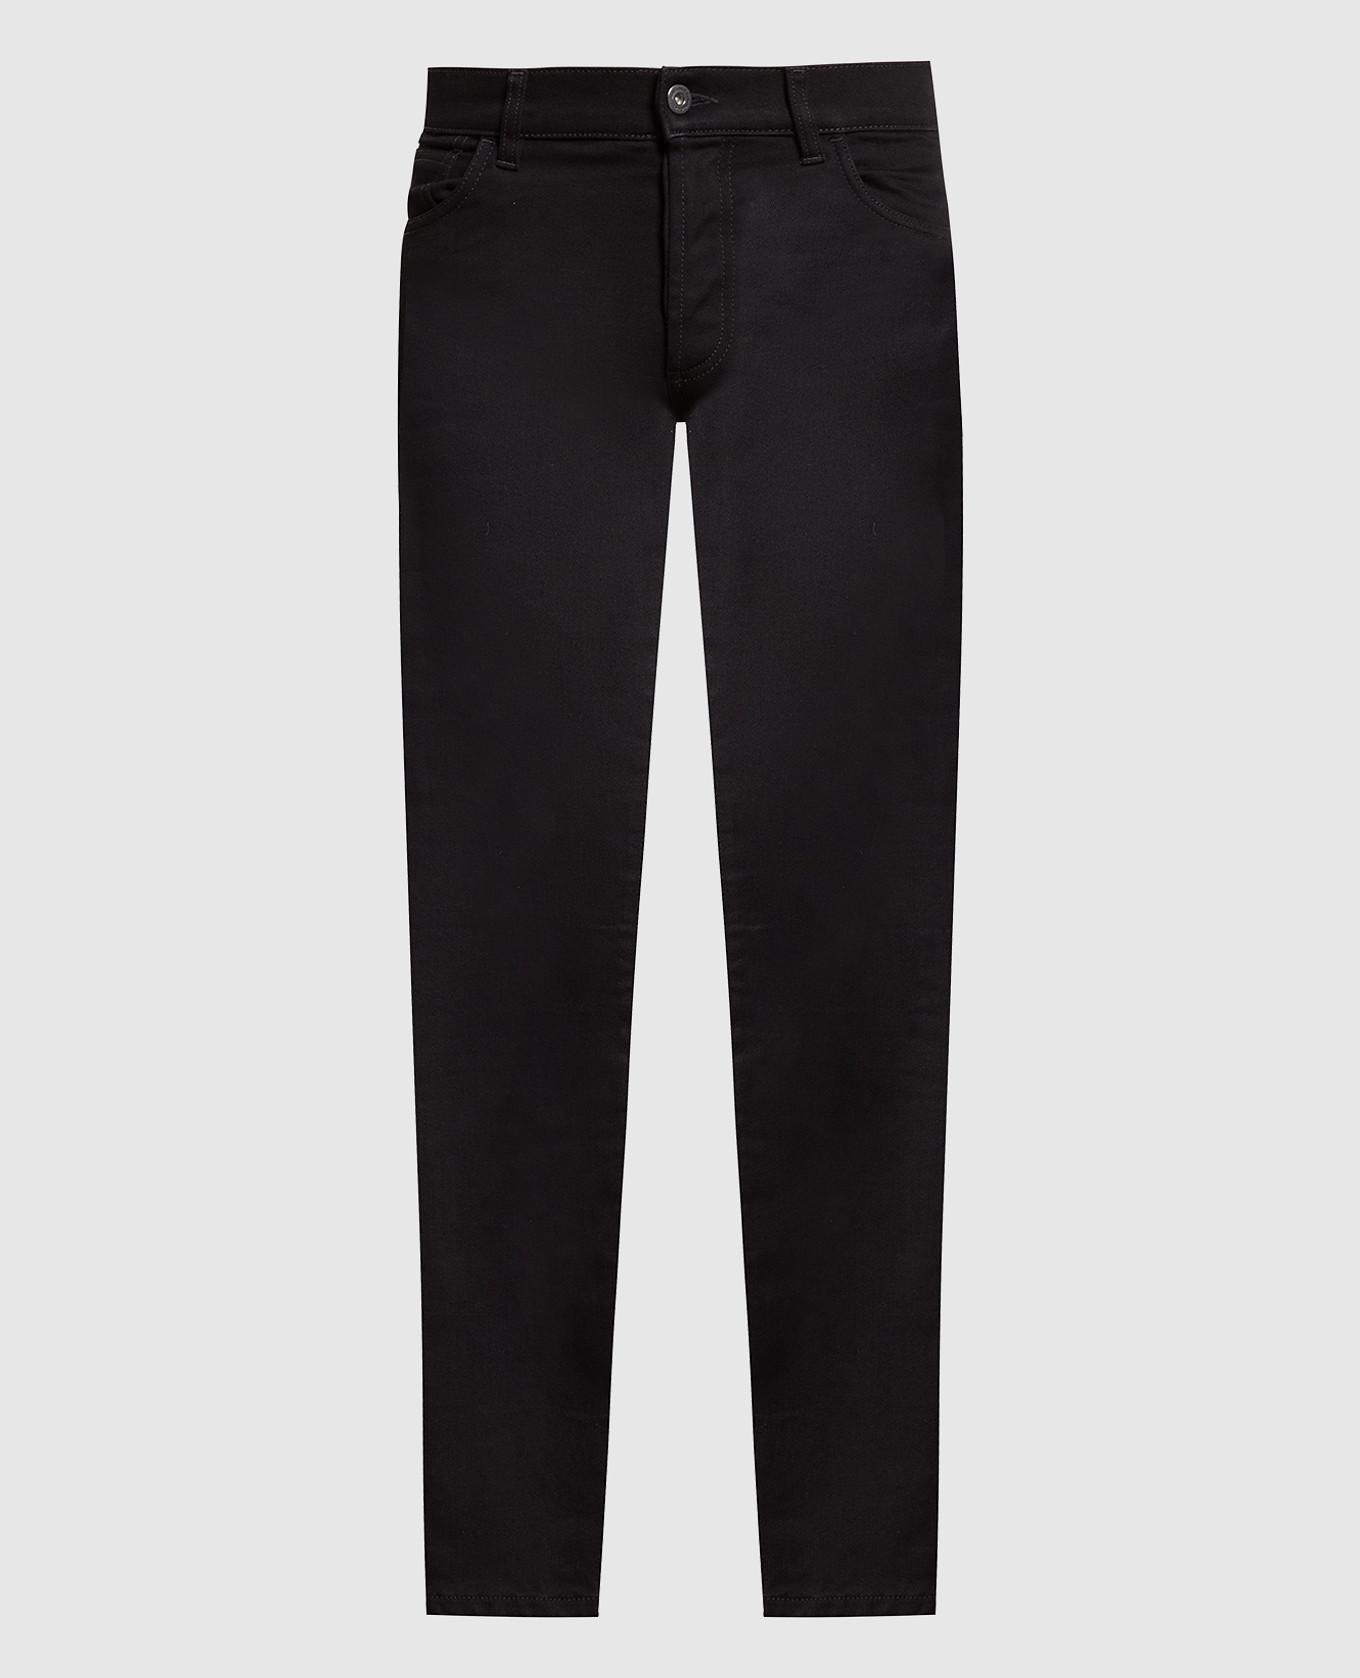 Black jeans with contrasting TEMPERA CROSS logo